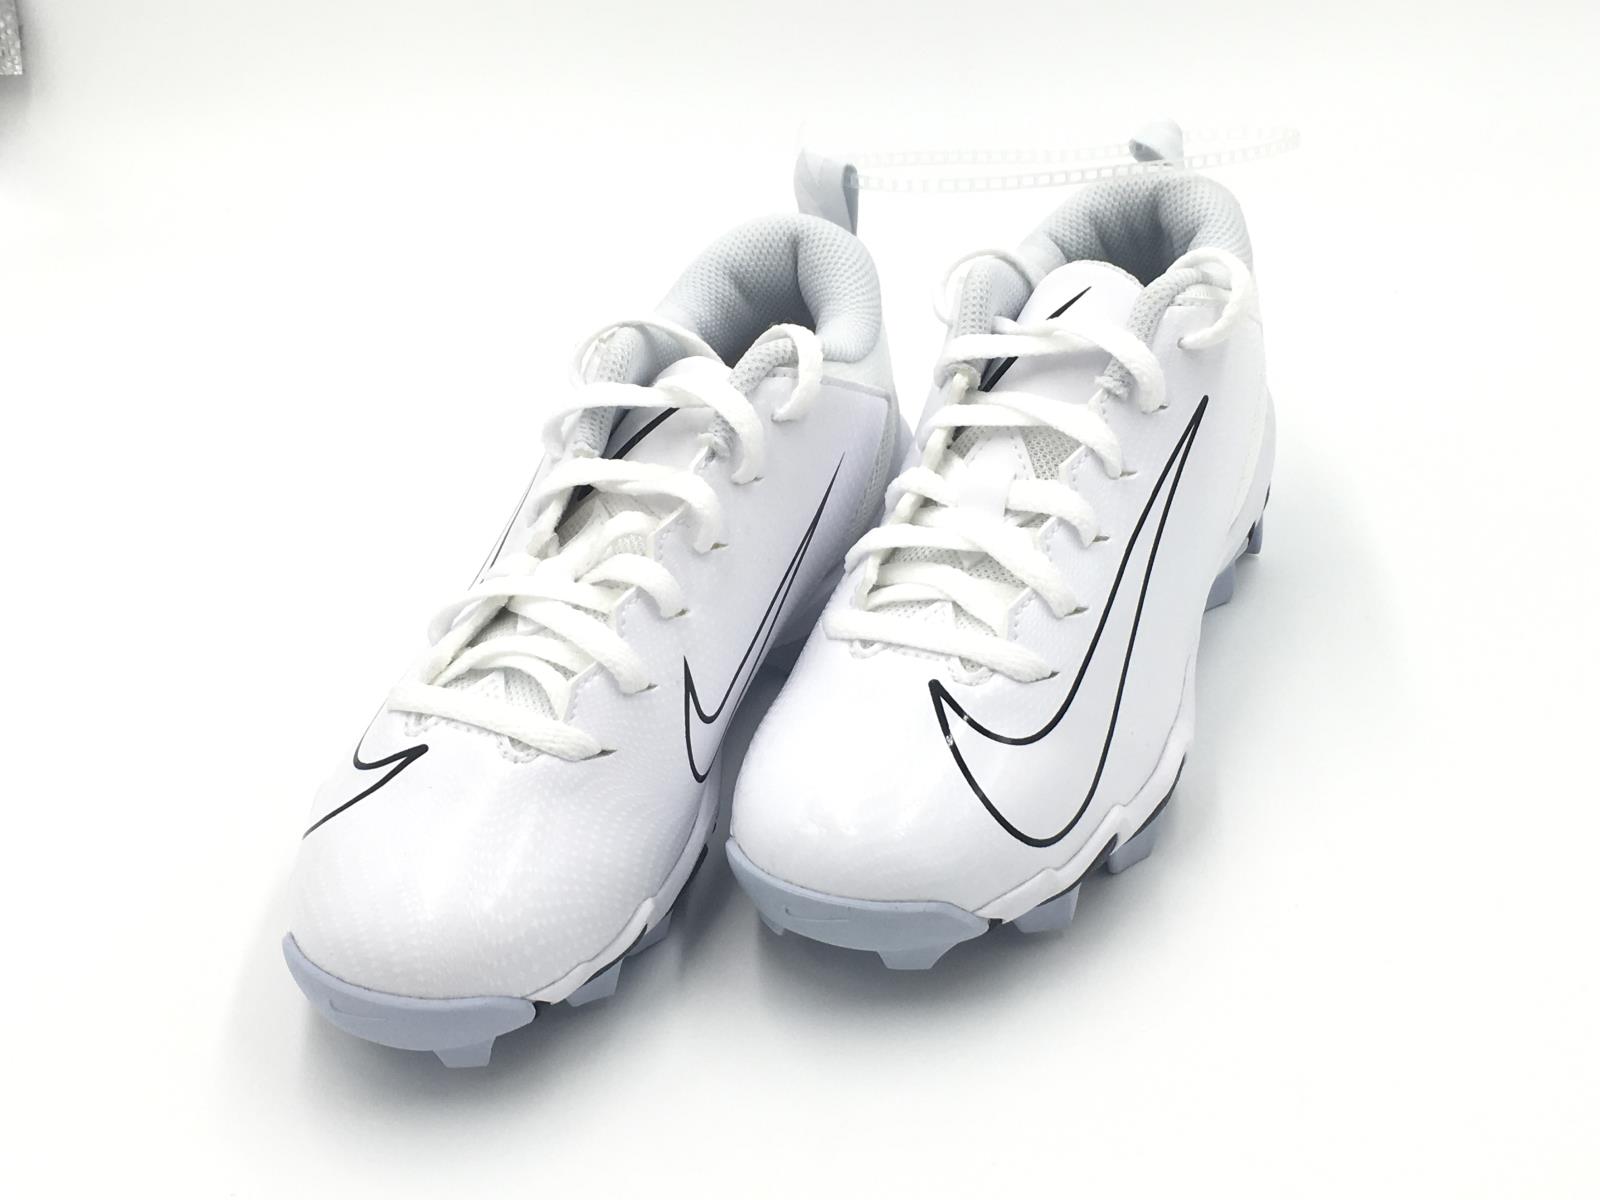 youth size 1 football cleats